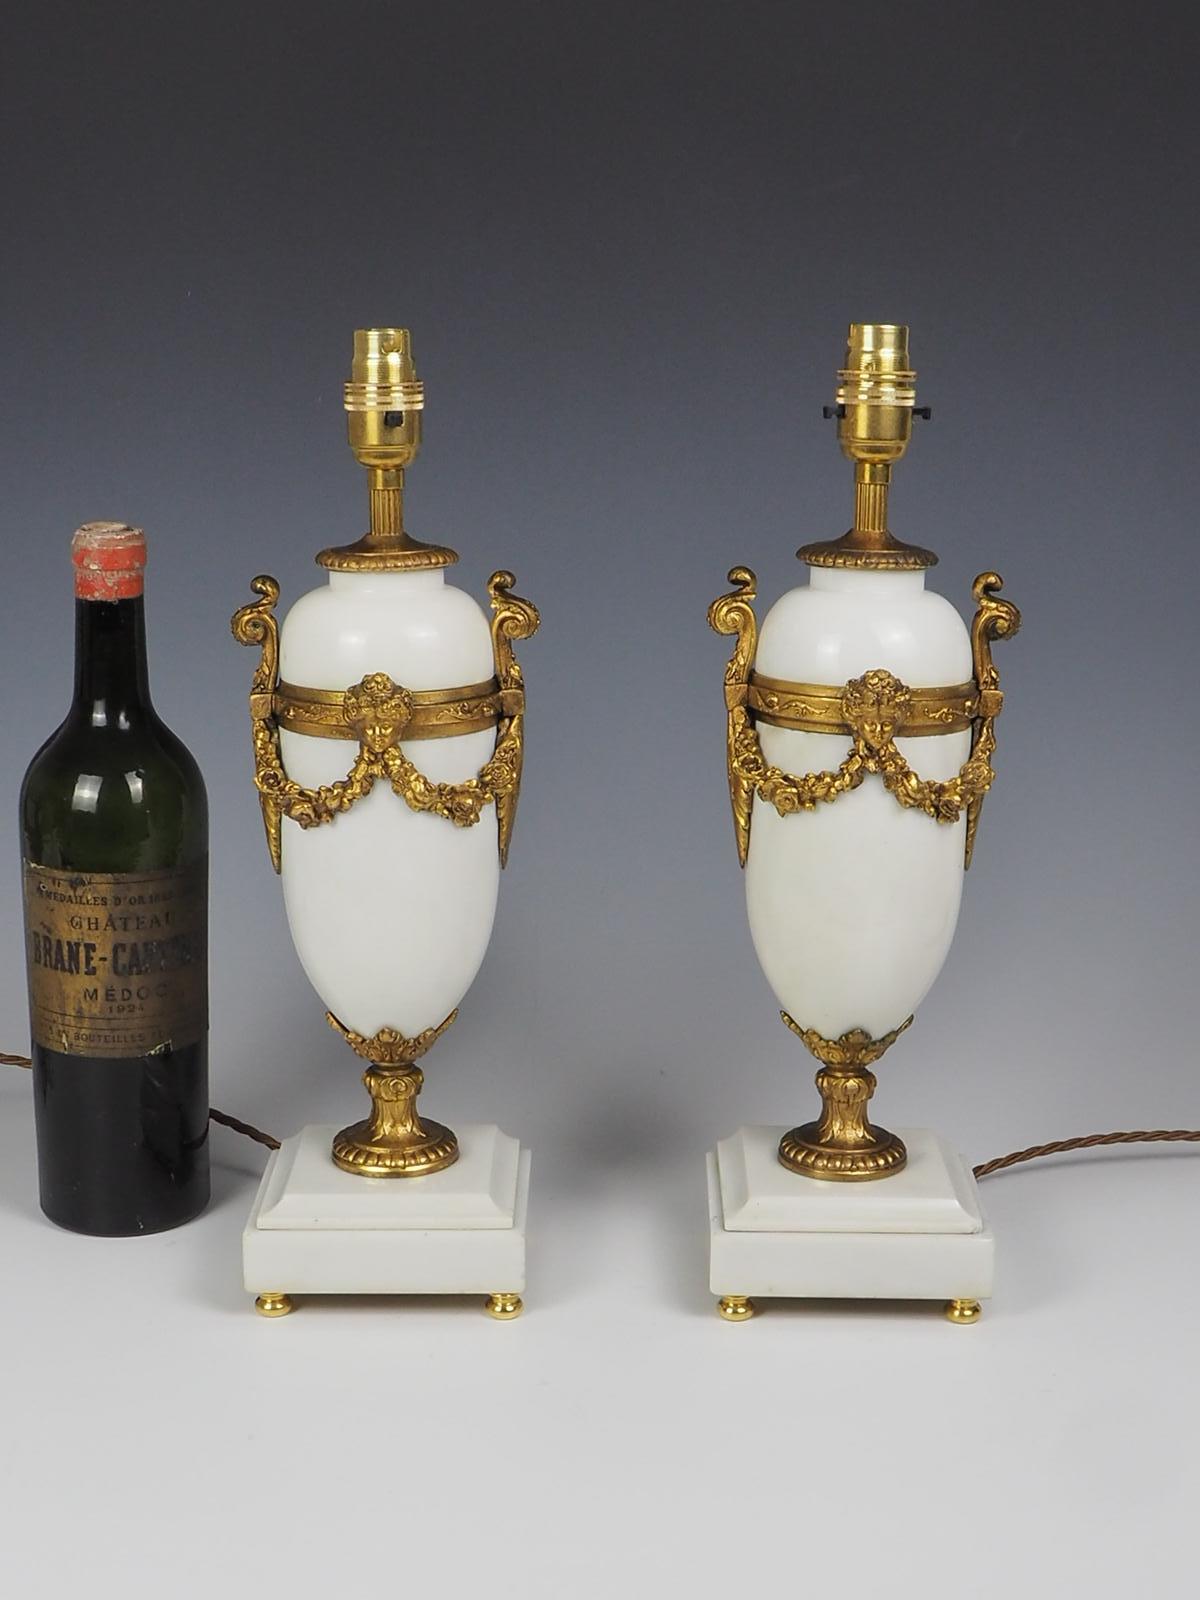 Pair of 19th Century French White Marble and Gilt Table Lamps For Sale 1